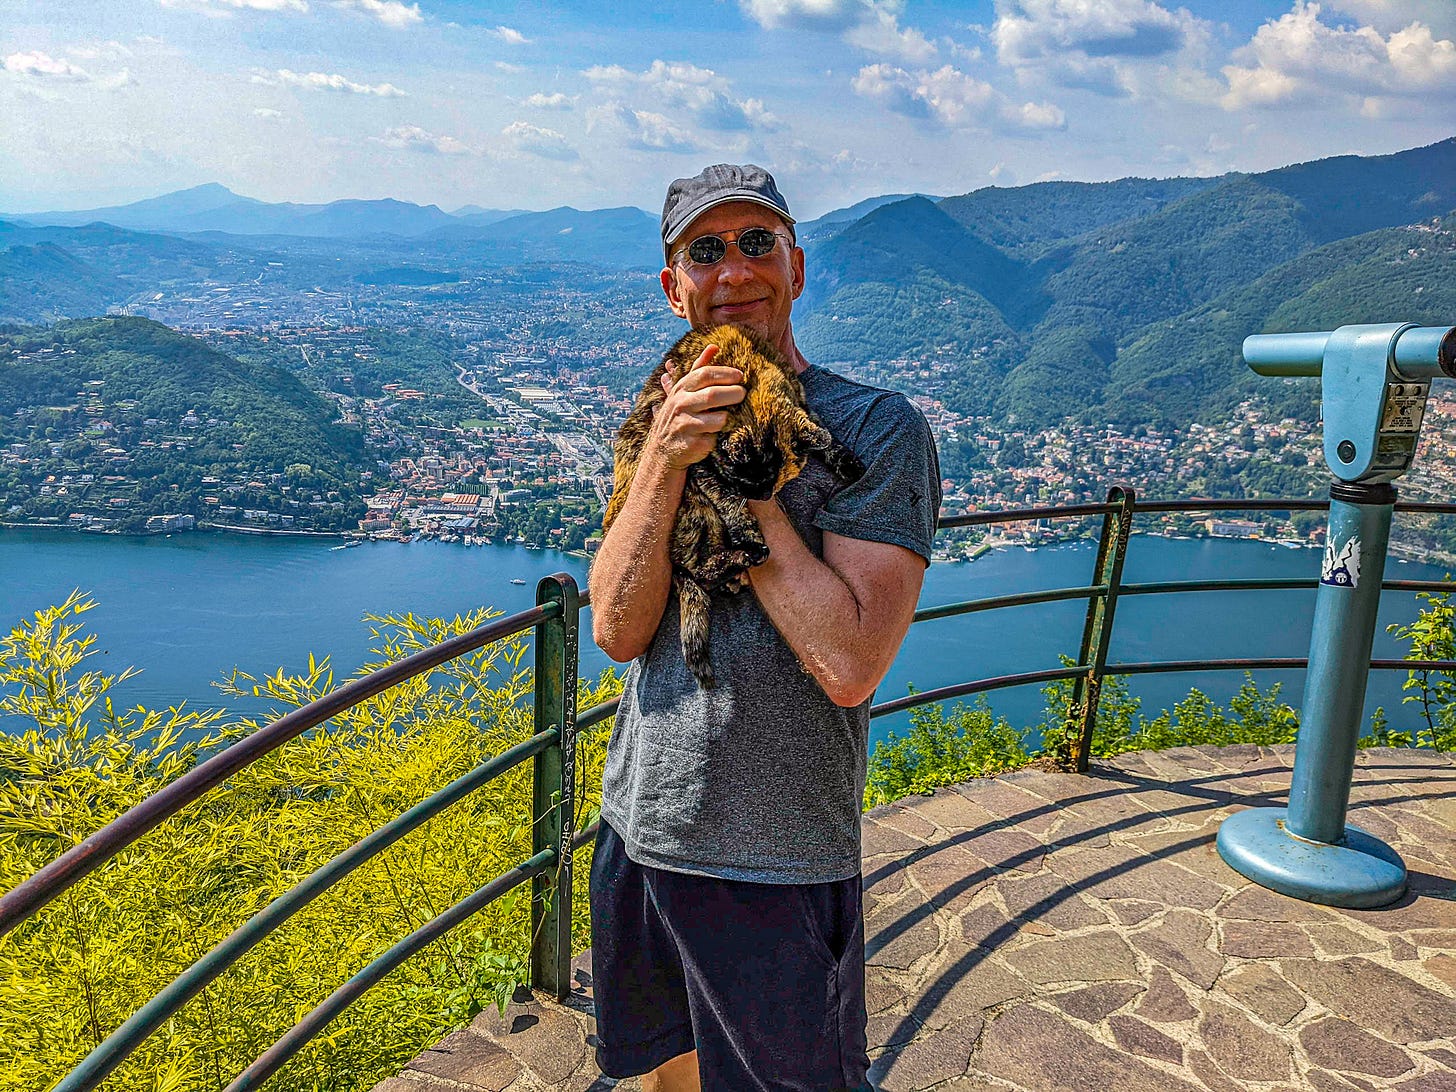 Brent and a new feline friend enjoying the view from Brunate.